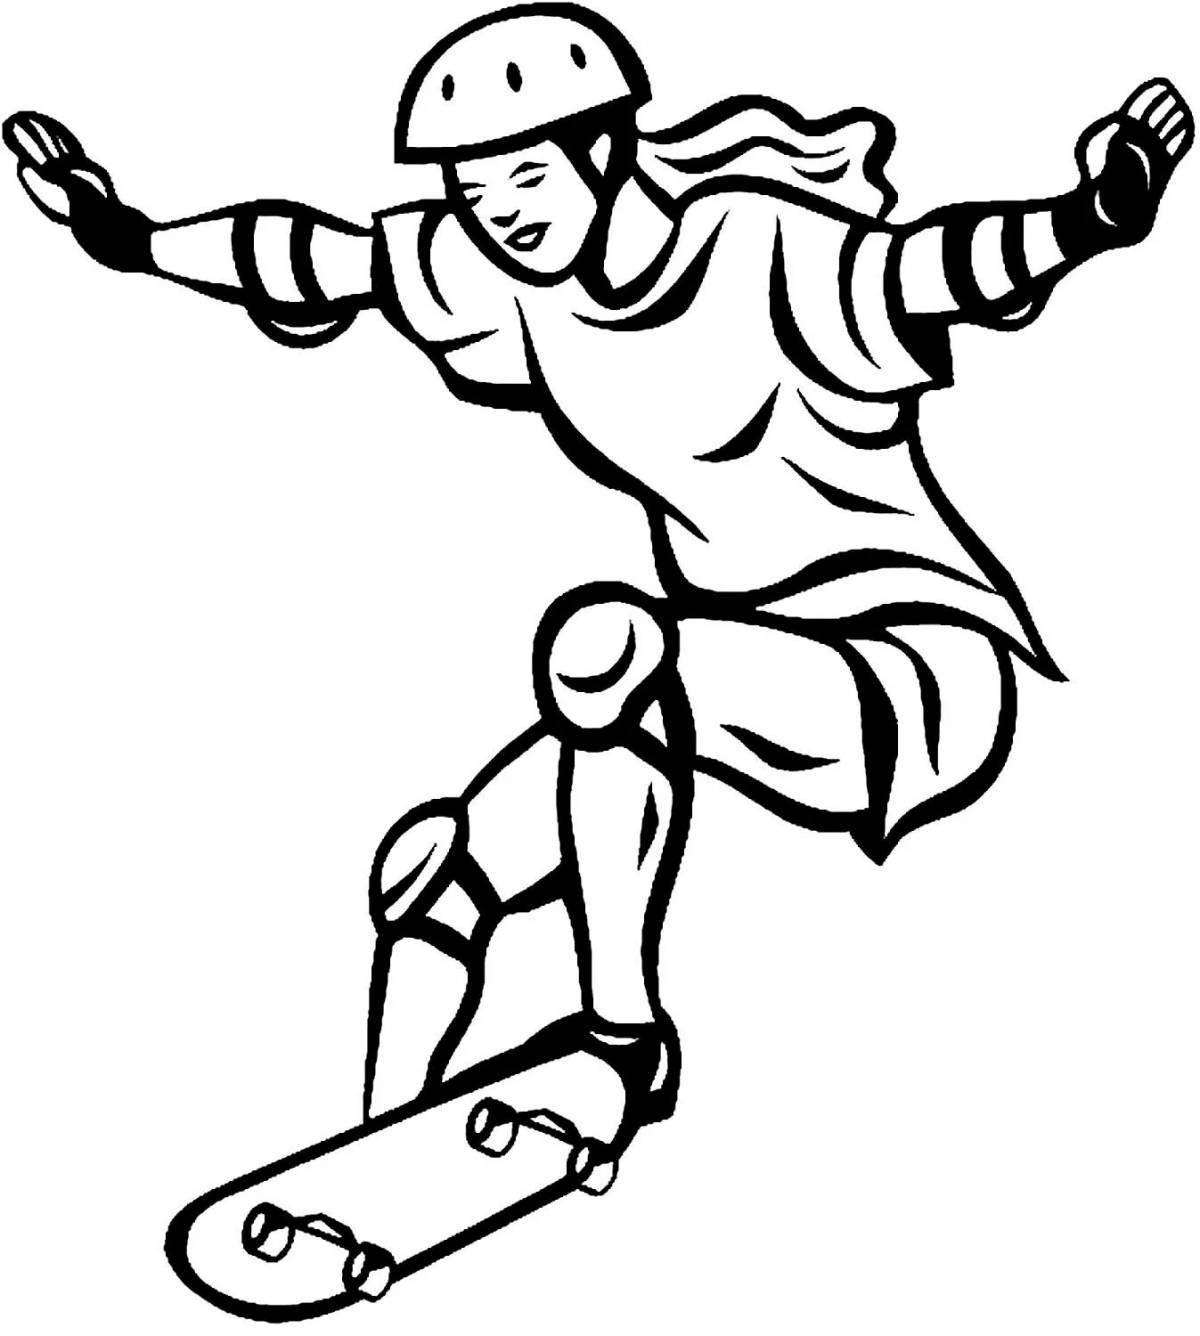 Exciting skate coloring